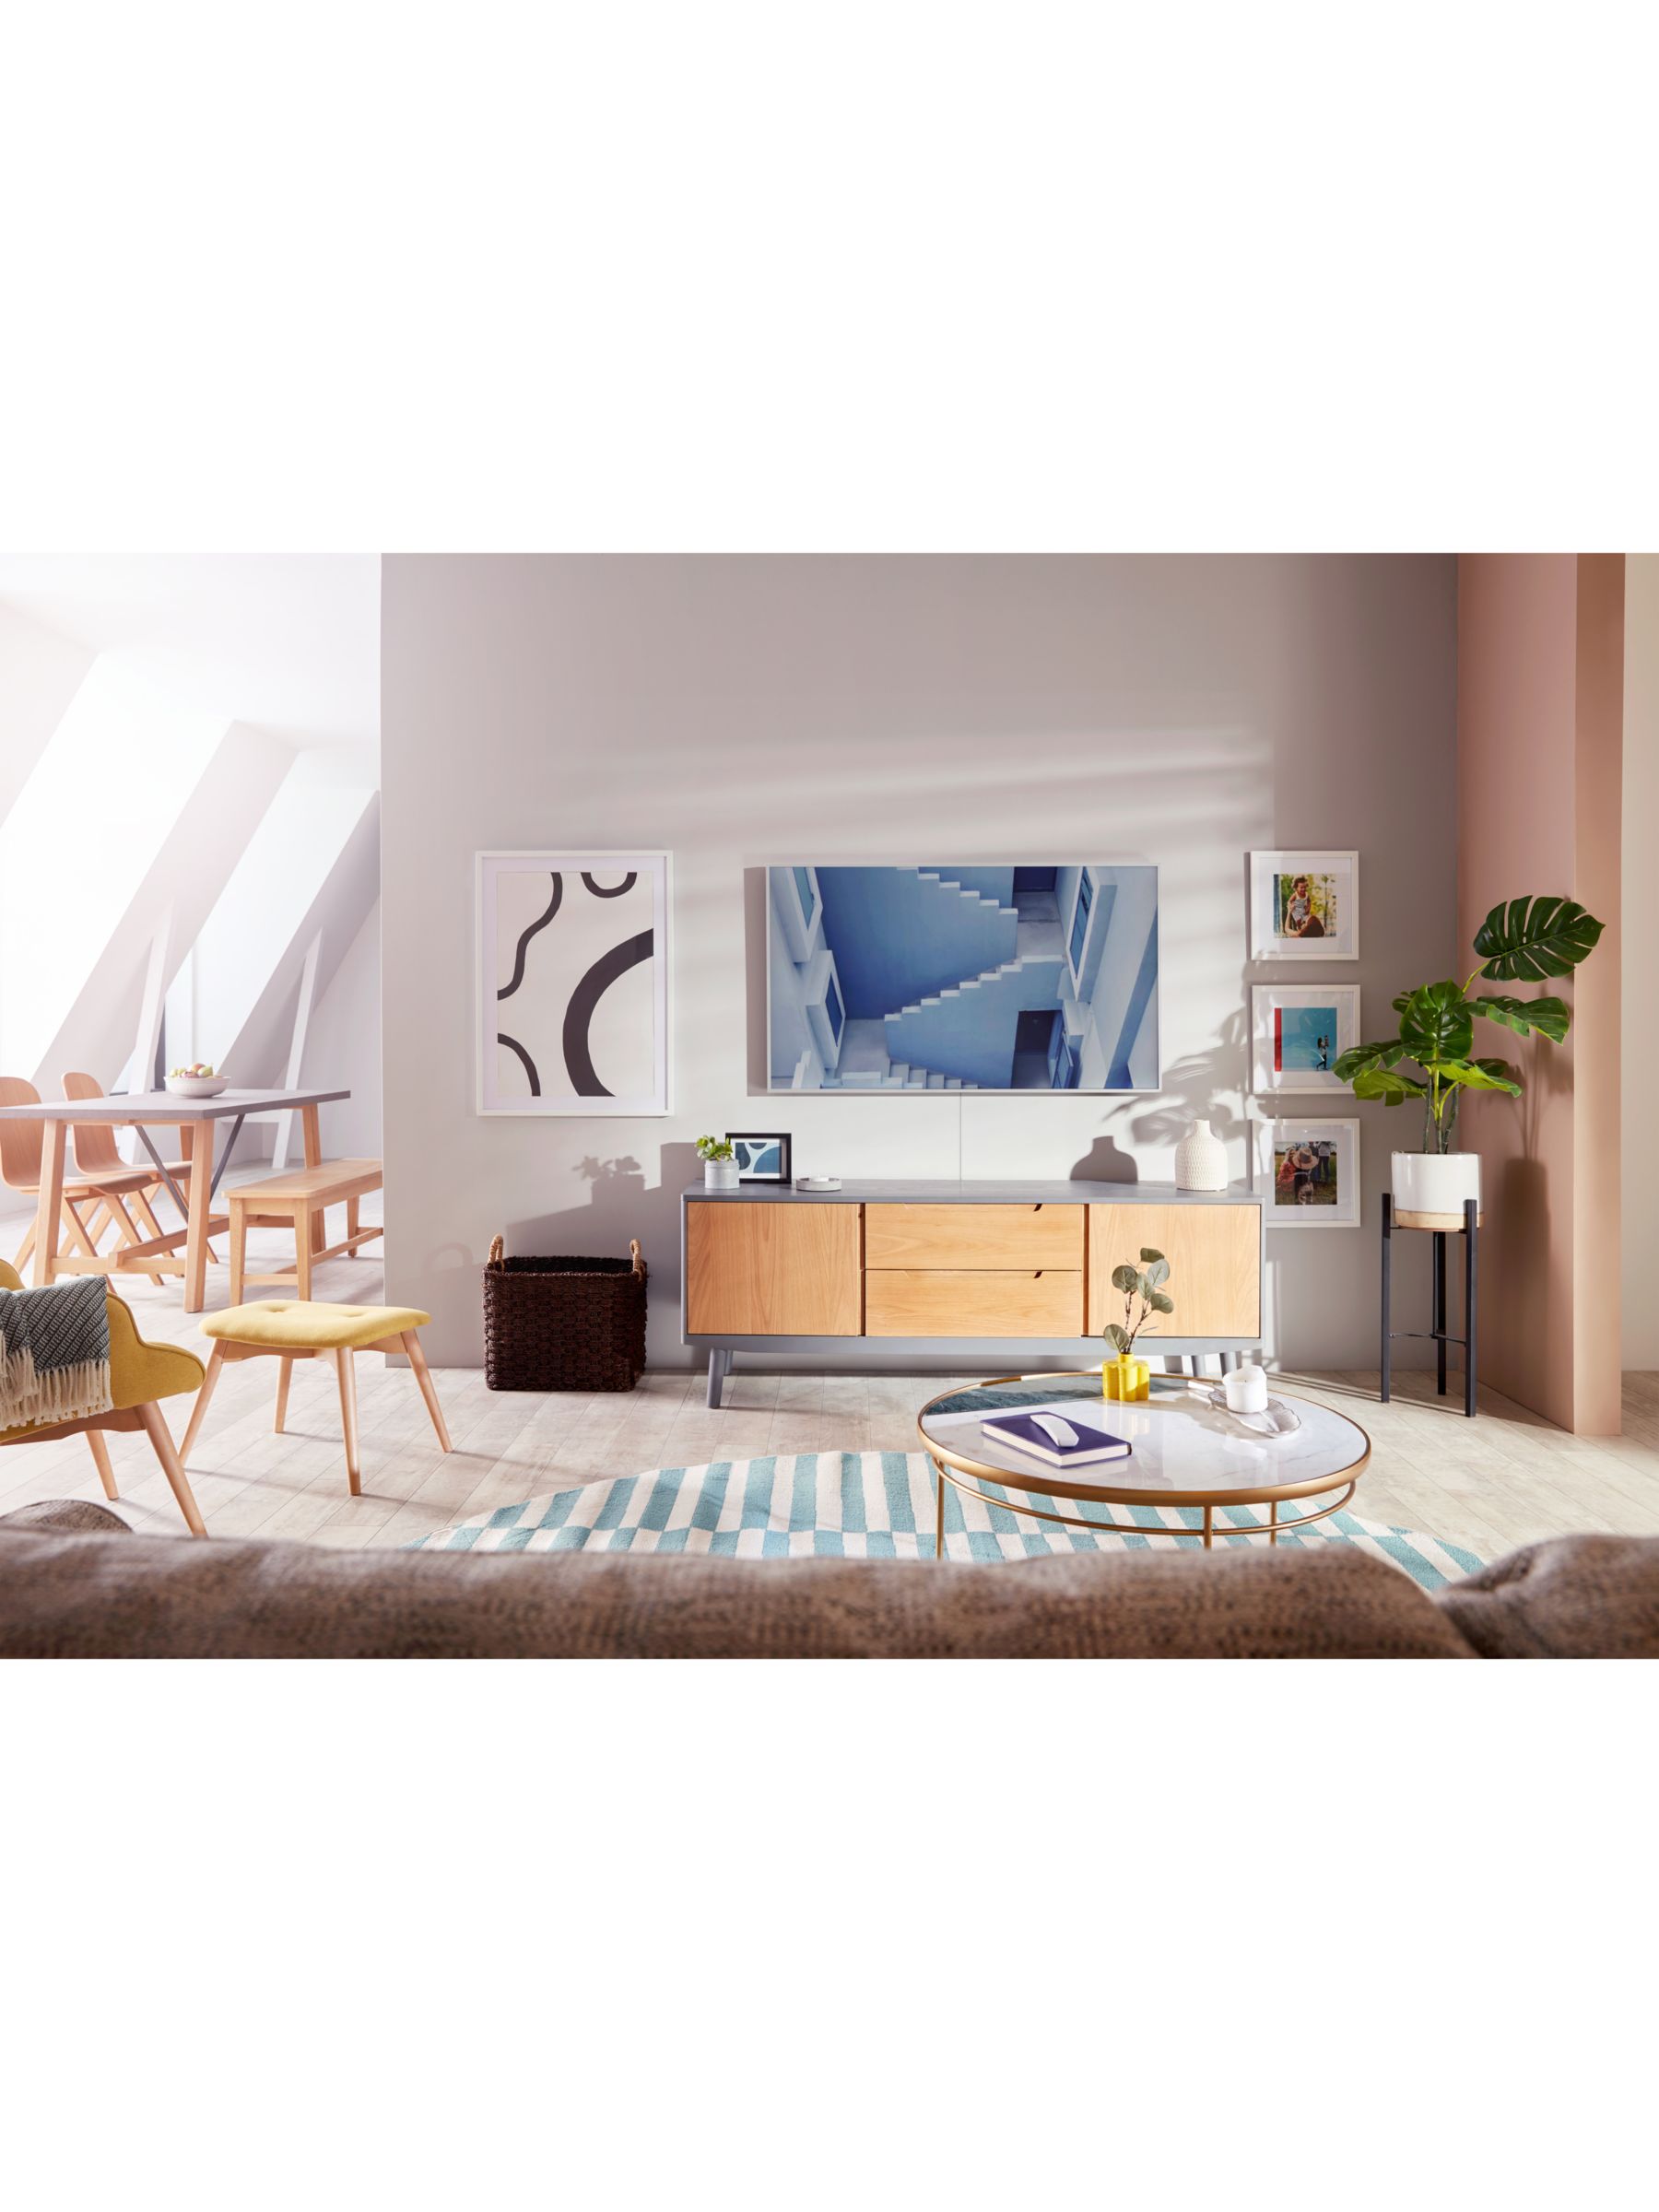 Samsung The Frame (2020) QLED Art Mode TV with No-Gap Wall Mount, 50 inch at John Lewis & Partners